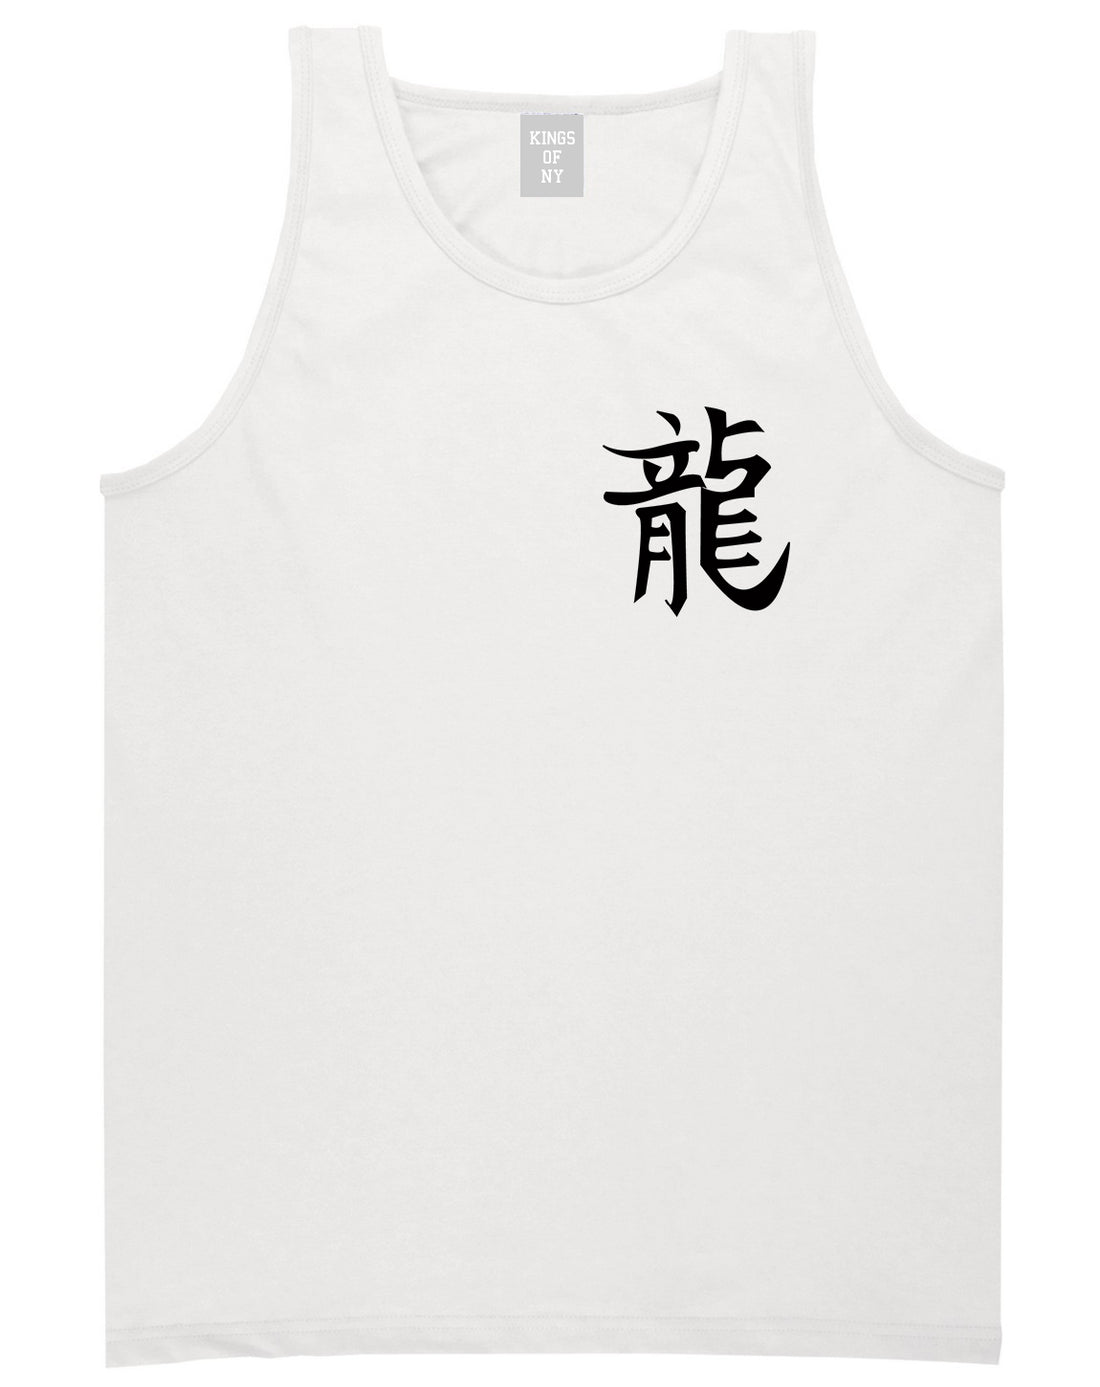 Chinese Symbol For Dragon Chest White Tank Top Shirt by Kings Of NY